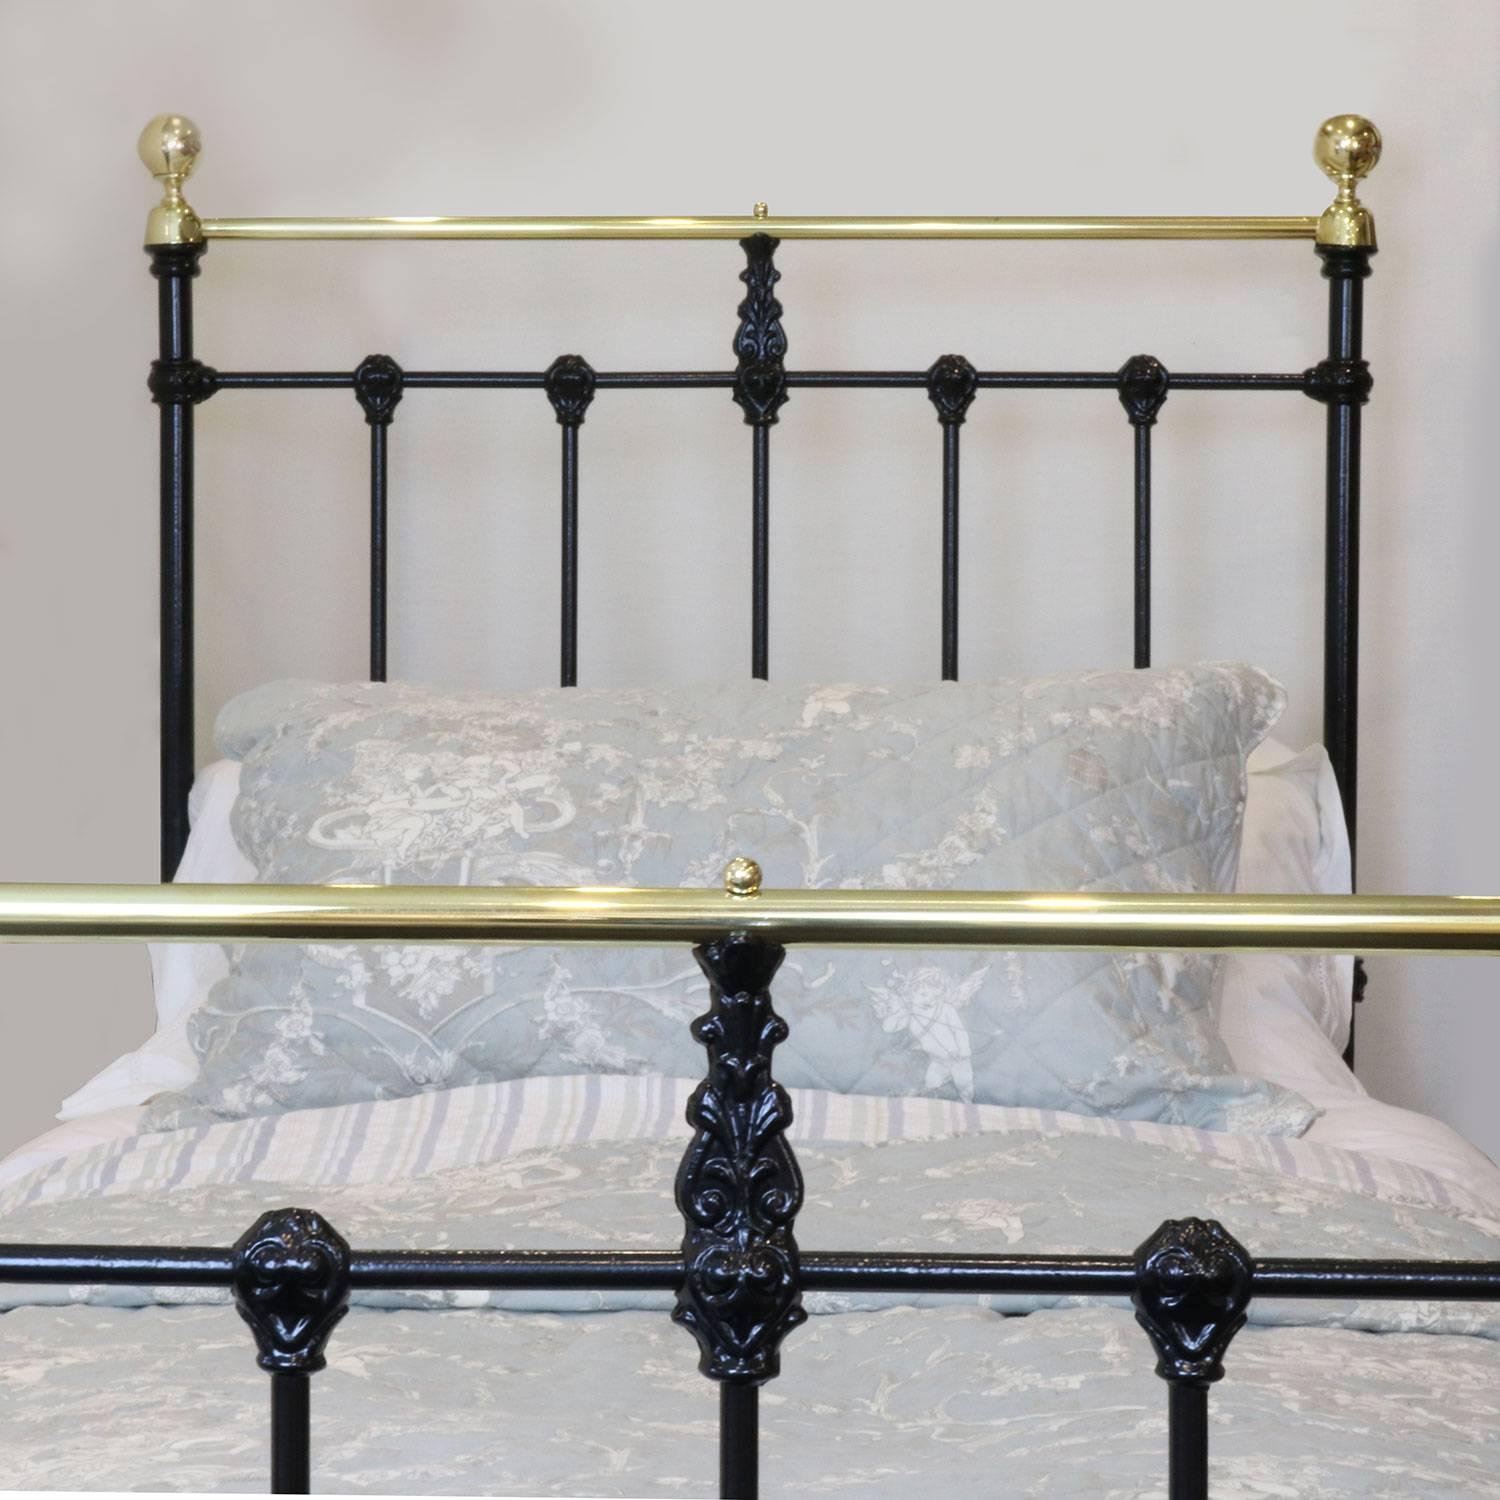 A single Victorian brass and iron bedstead finished in black with a straight brass top rail.

This bed accepts a 3ft wide (36 inches or 90cm) base and mattress set.

The price is for the bed frame alone. The base, mattress, bedding and bed linen